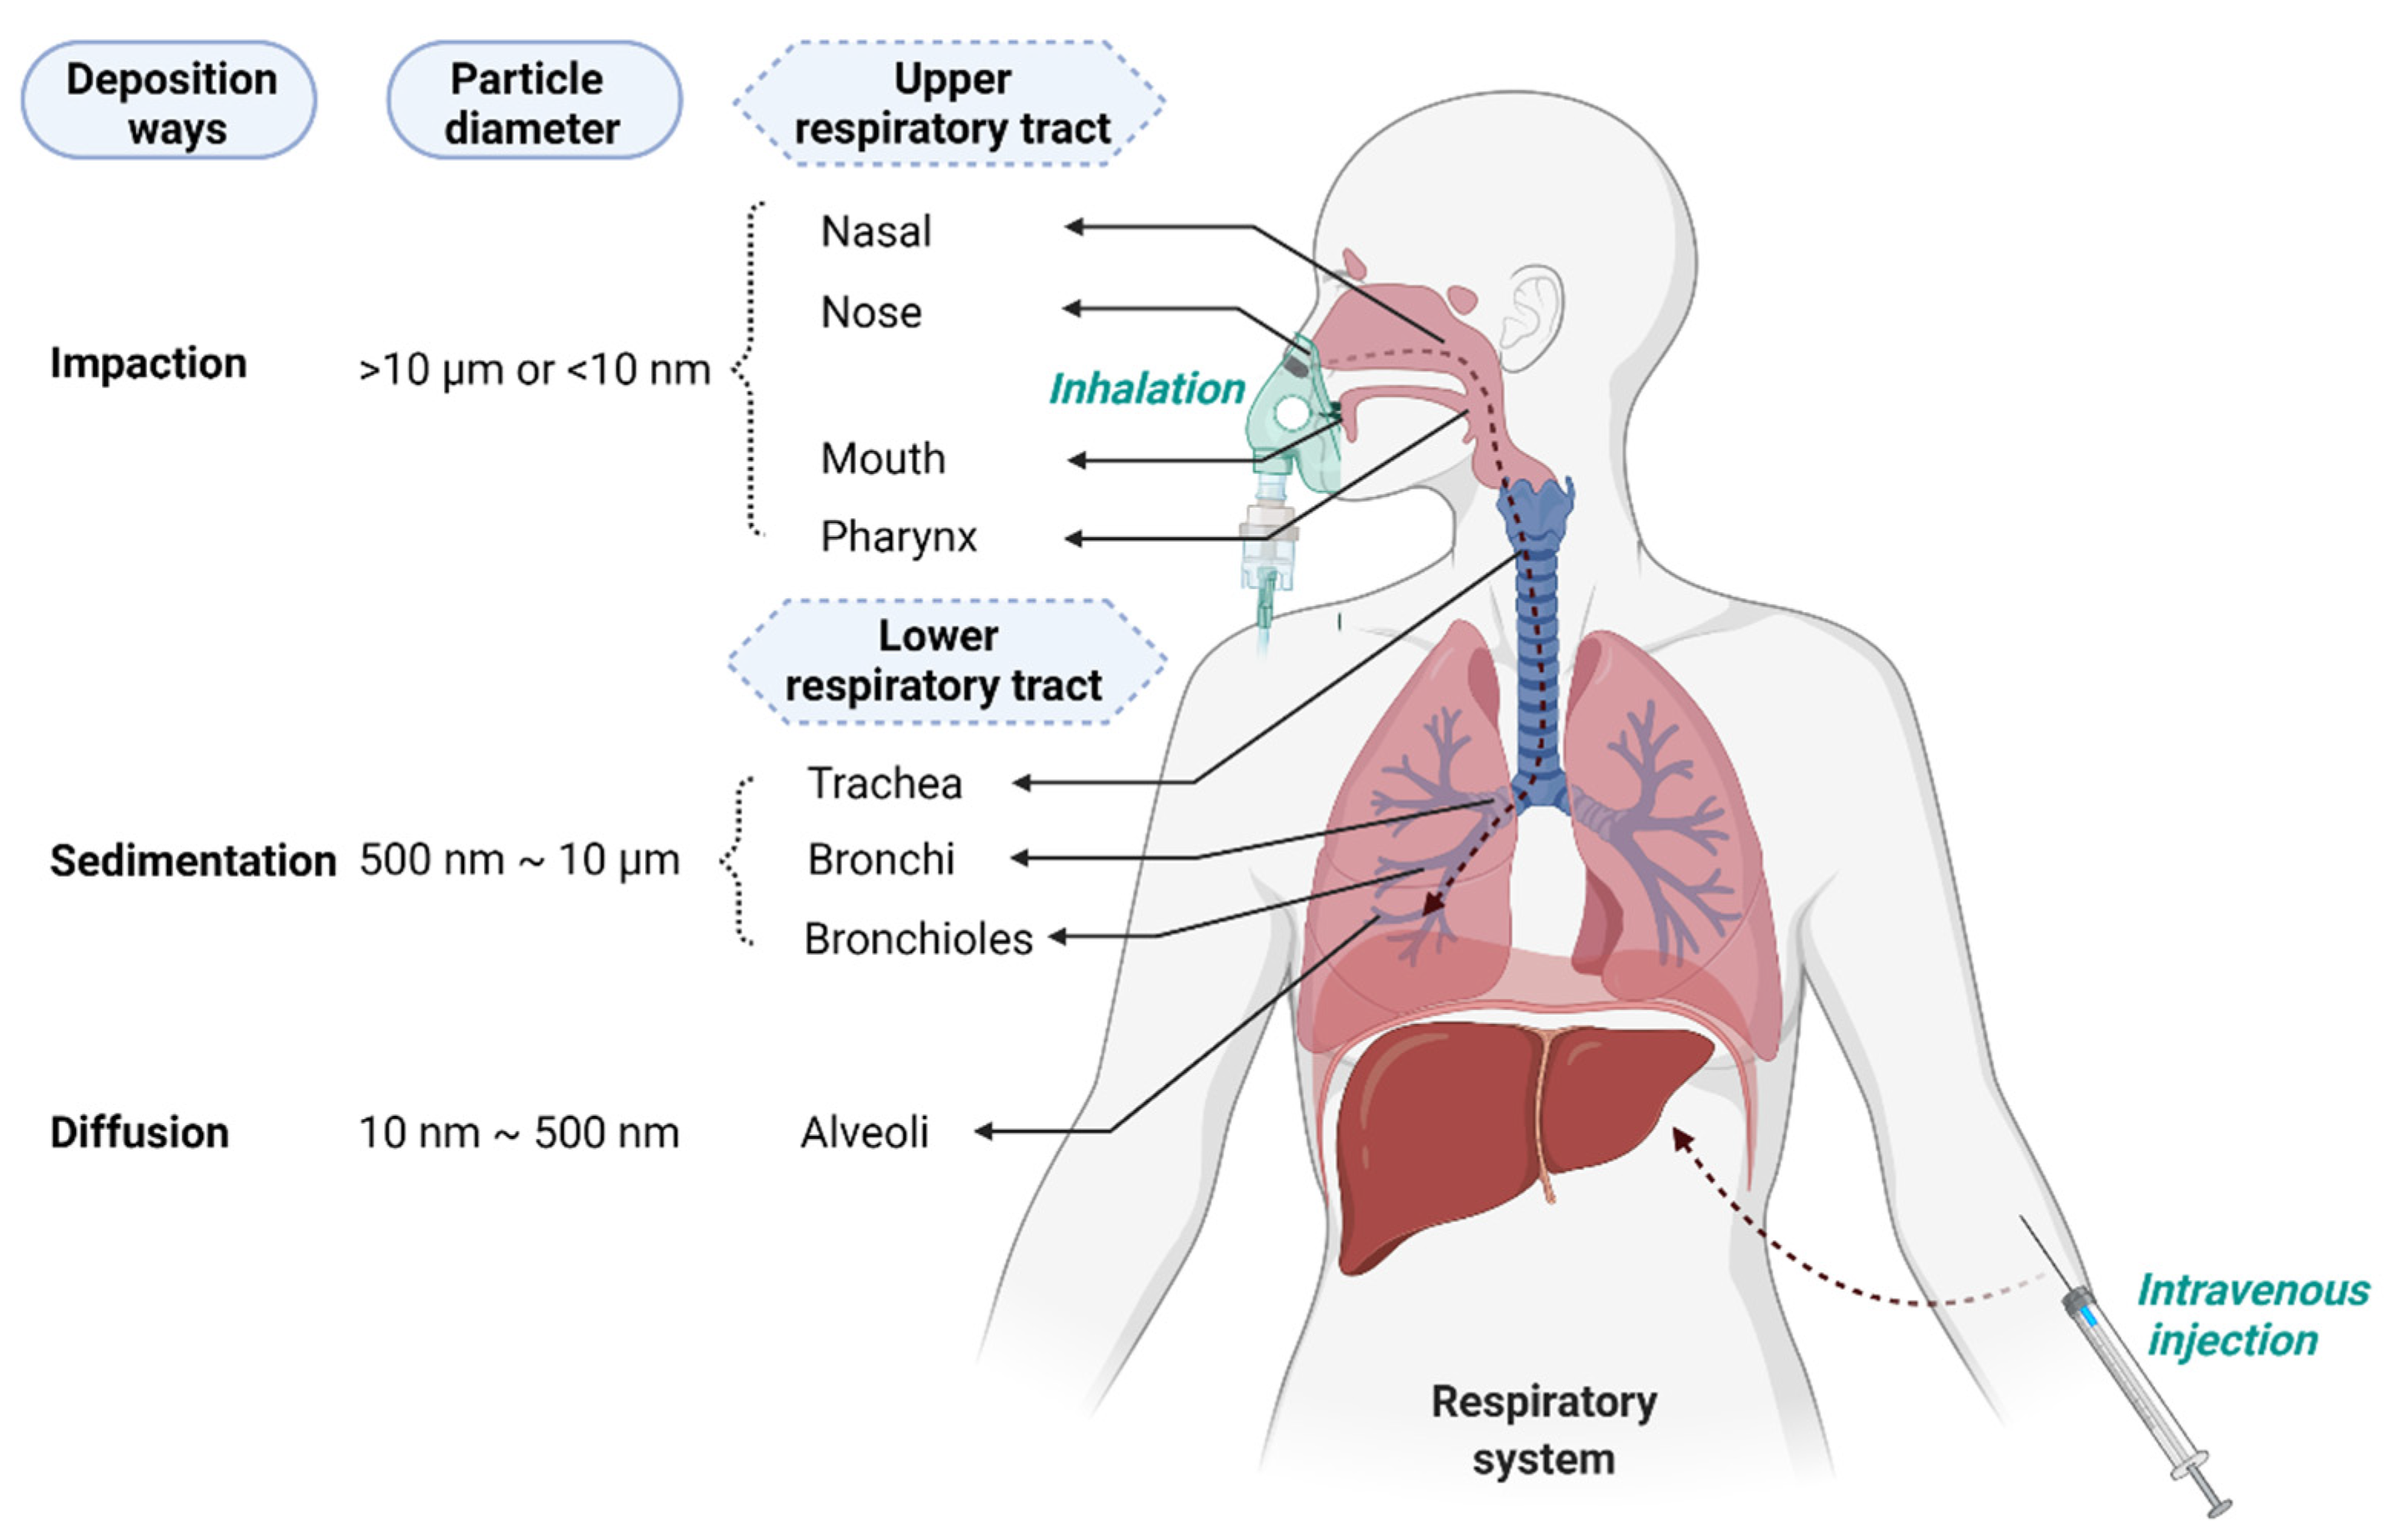 IJMS | Free Full-Text | Nanoparticle Delivery Platforms for RNAi  Therapeutics Targeting COVID-19 Disease in the Respiratory Tract | HTML